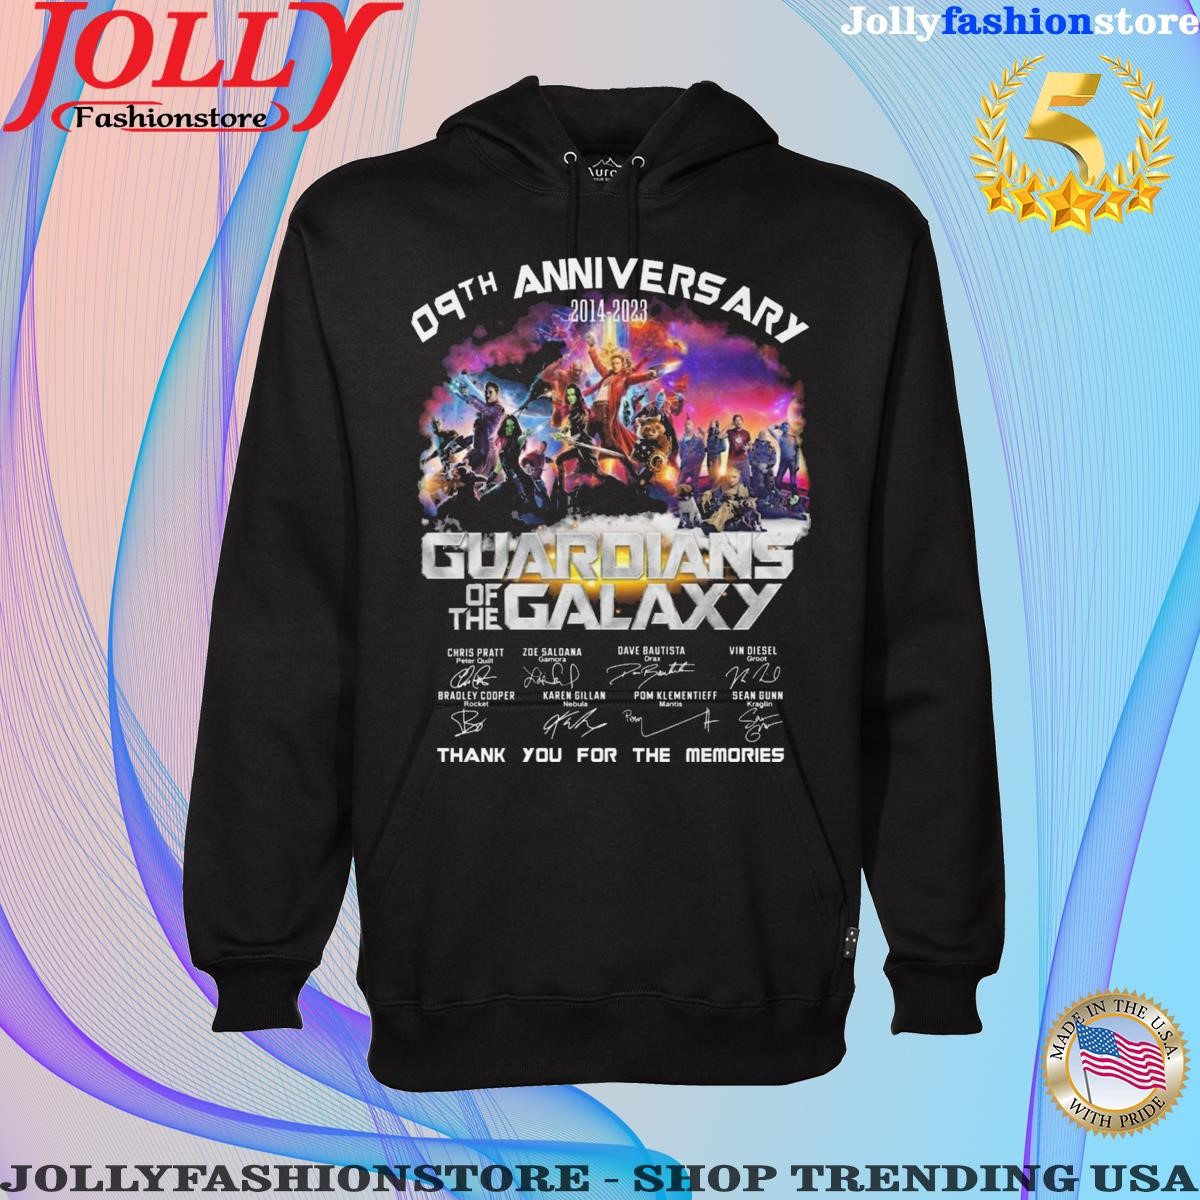 09th anniversary 2014 2023 guardians of the galaxy thank you for the memories signatures shirt Hoodie shirt.png